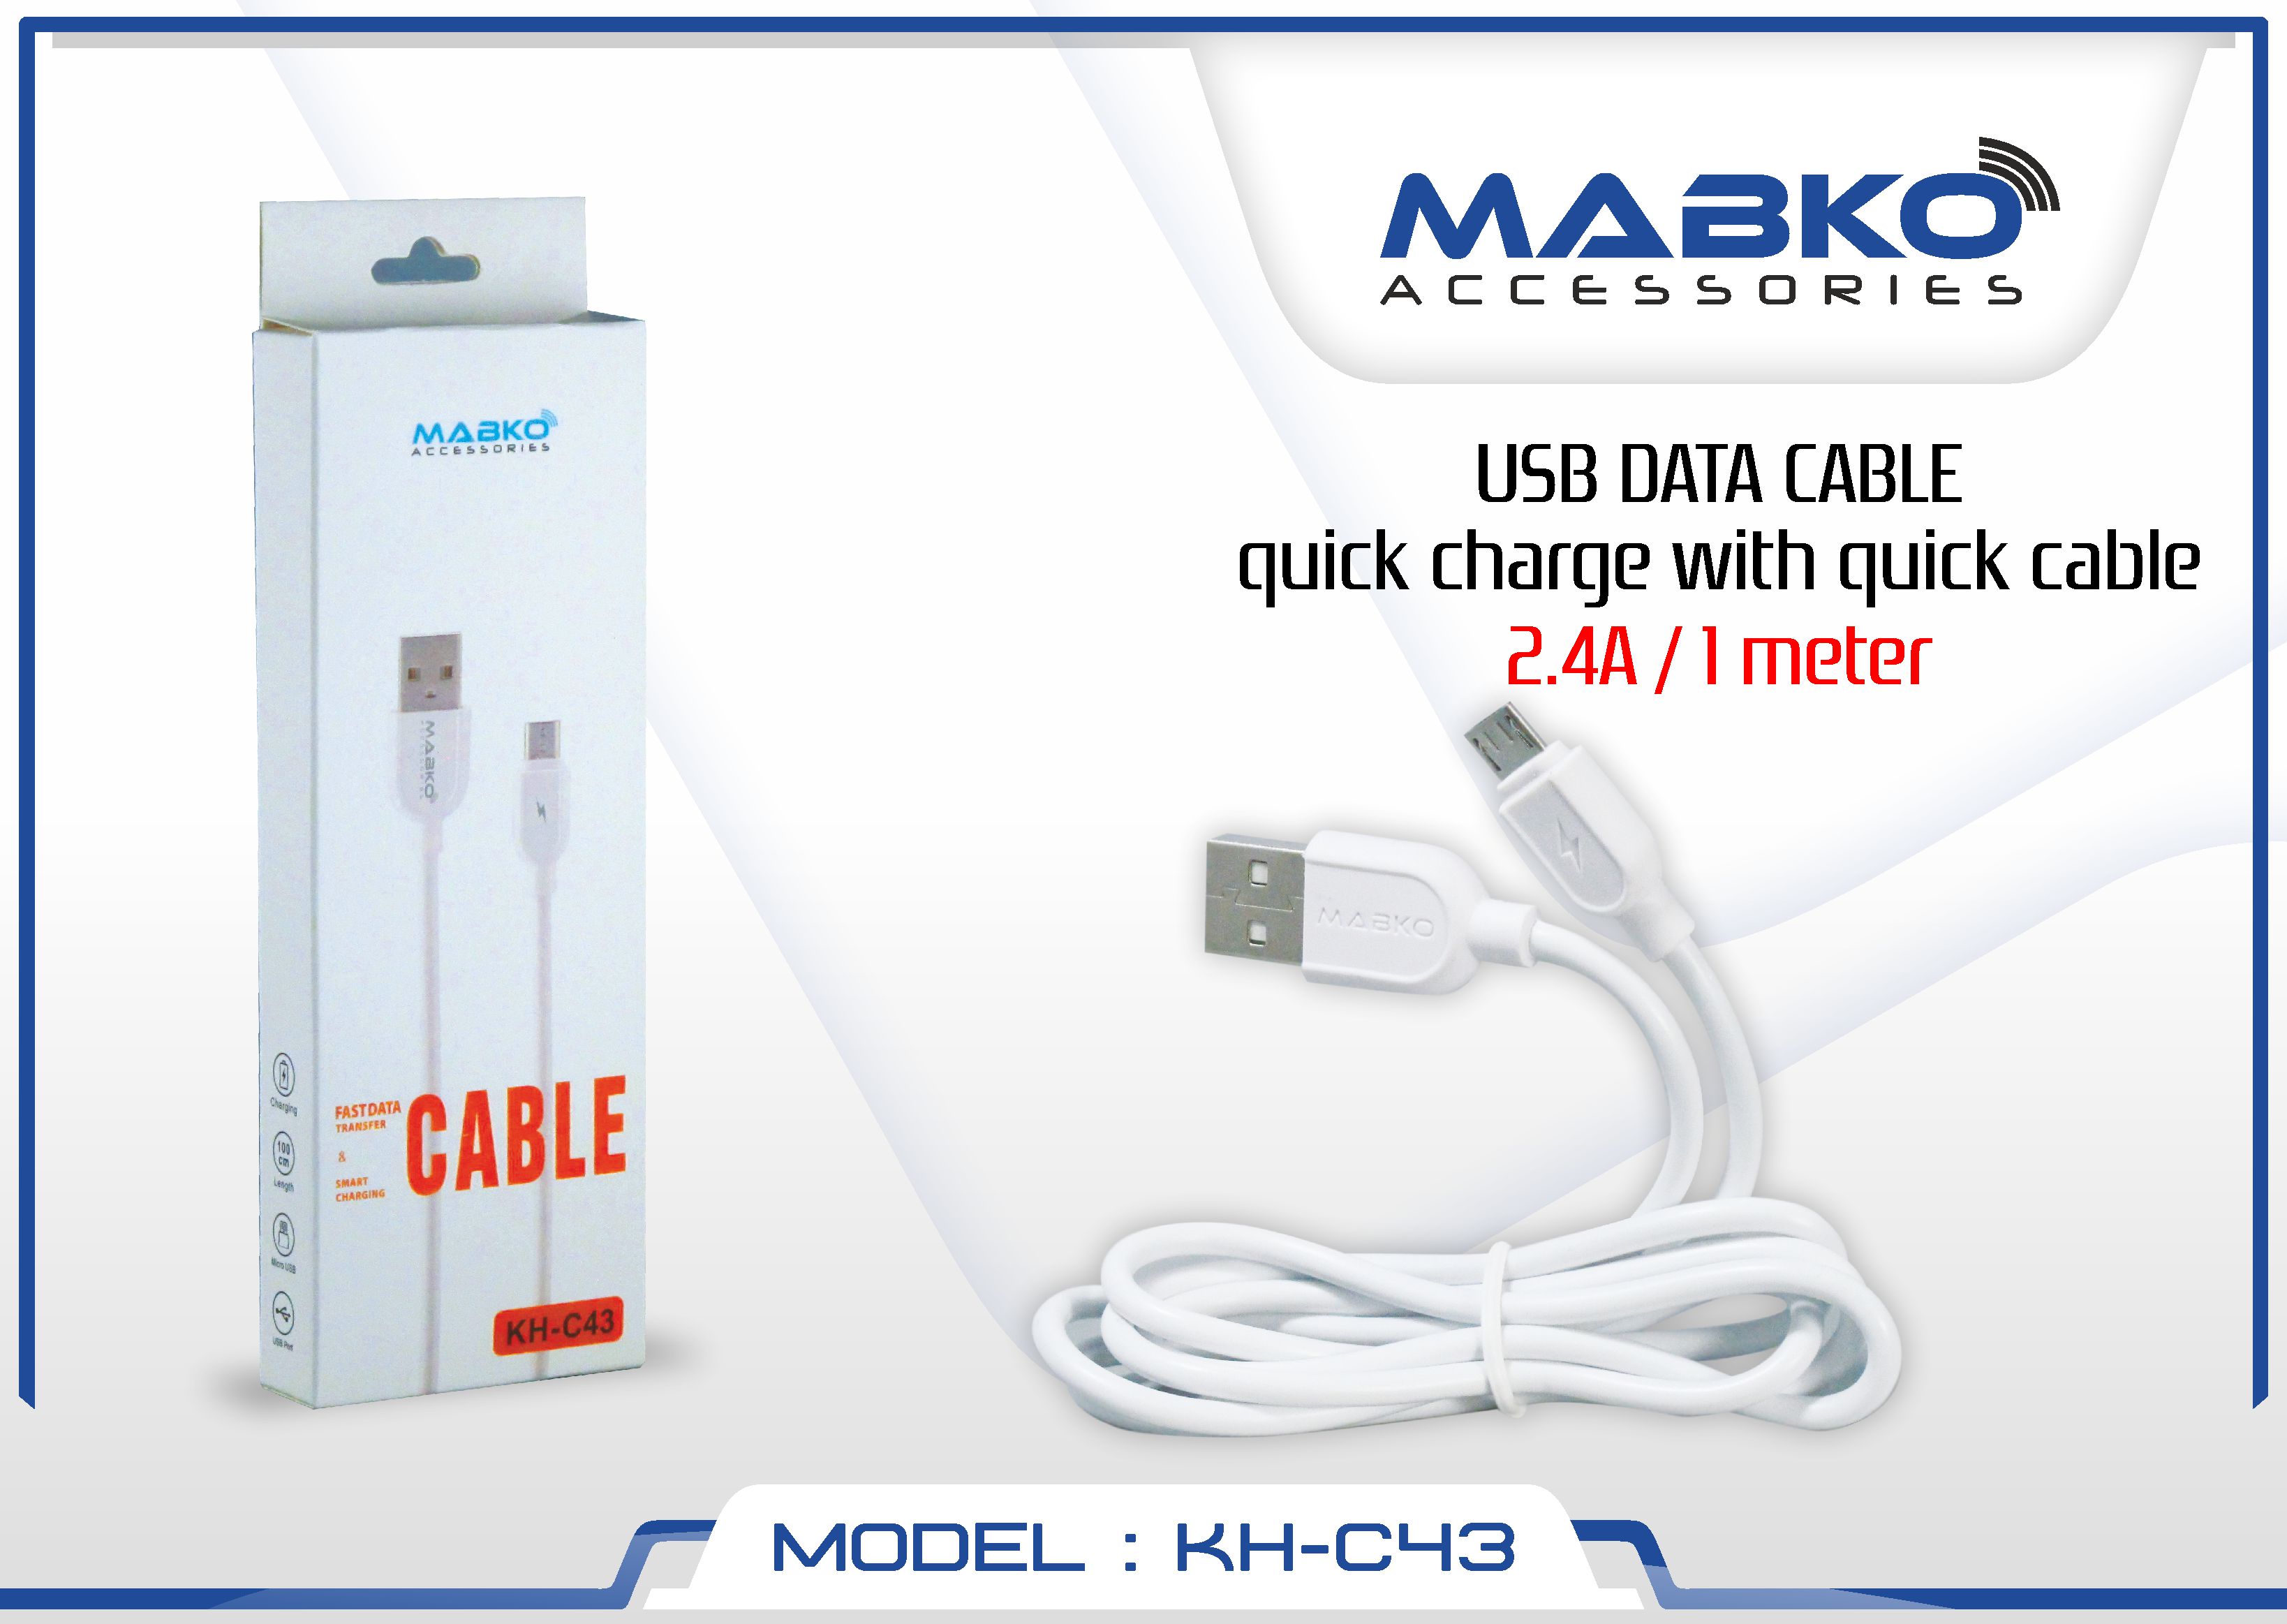 MABKO CABLE KH-C21